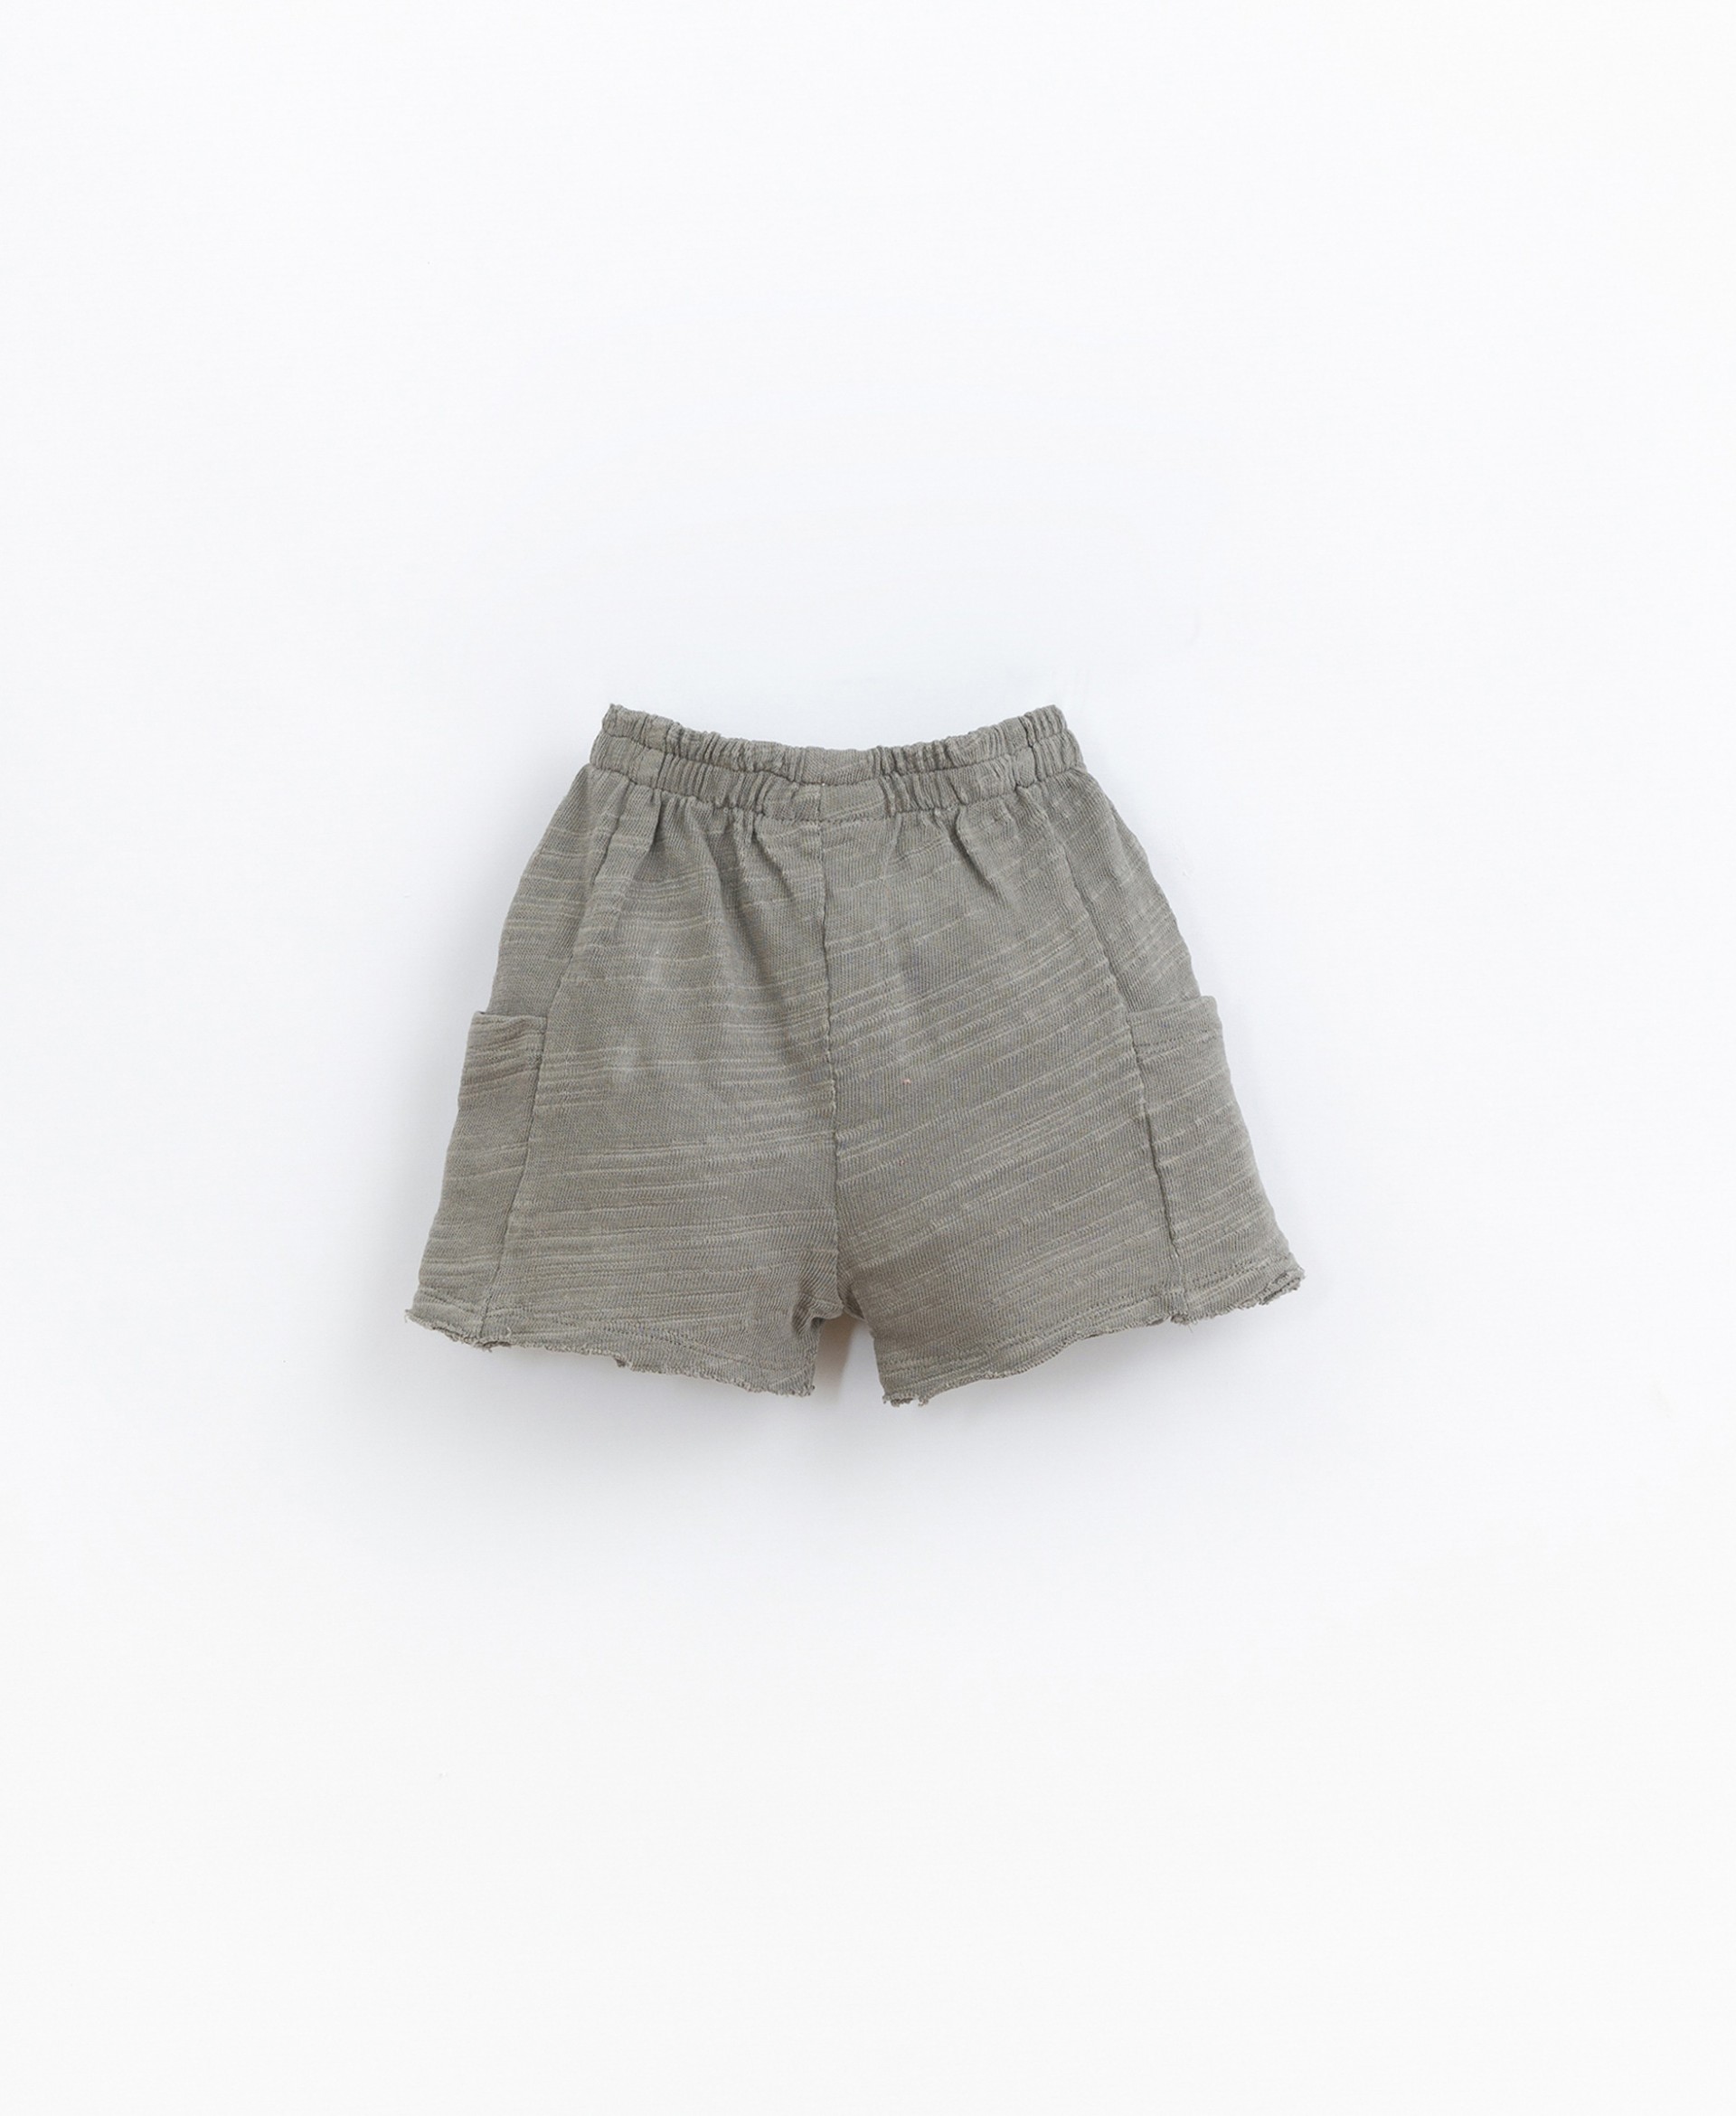 Jersey shorts with big pockets |Basketry